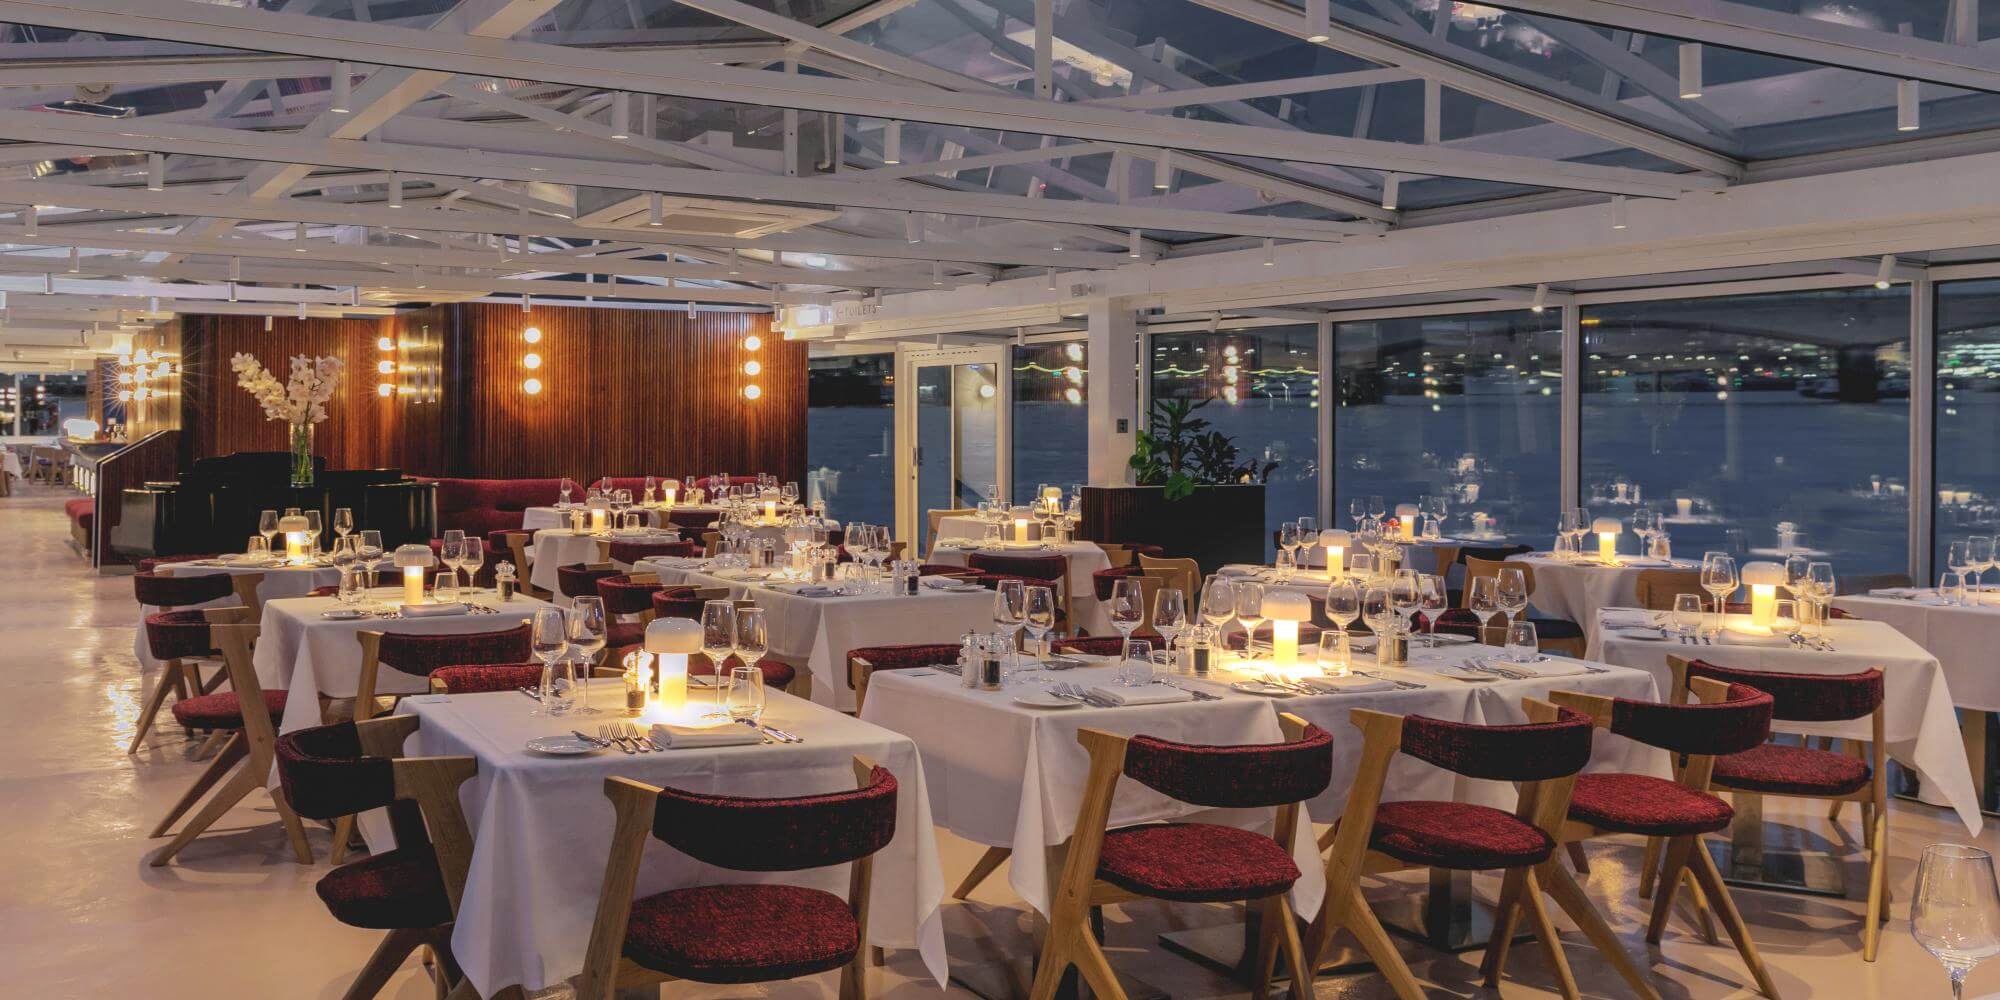 Enjoy a first class Thames New Year's Eve experience on board the newly refurbished Glass Room boat